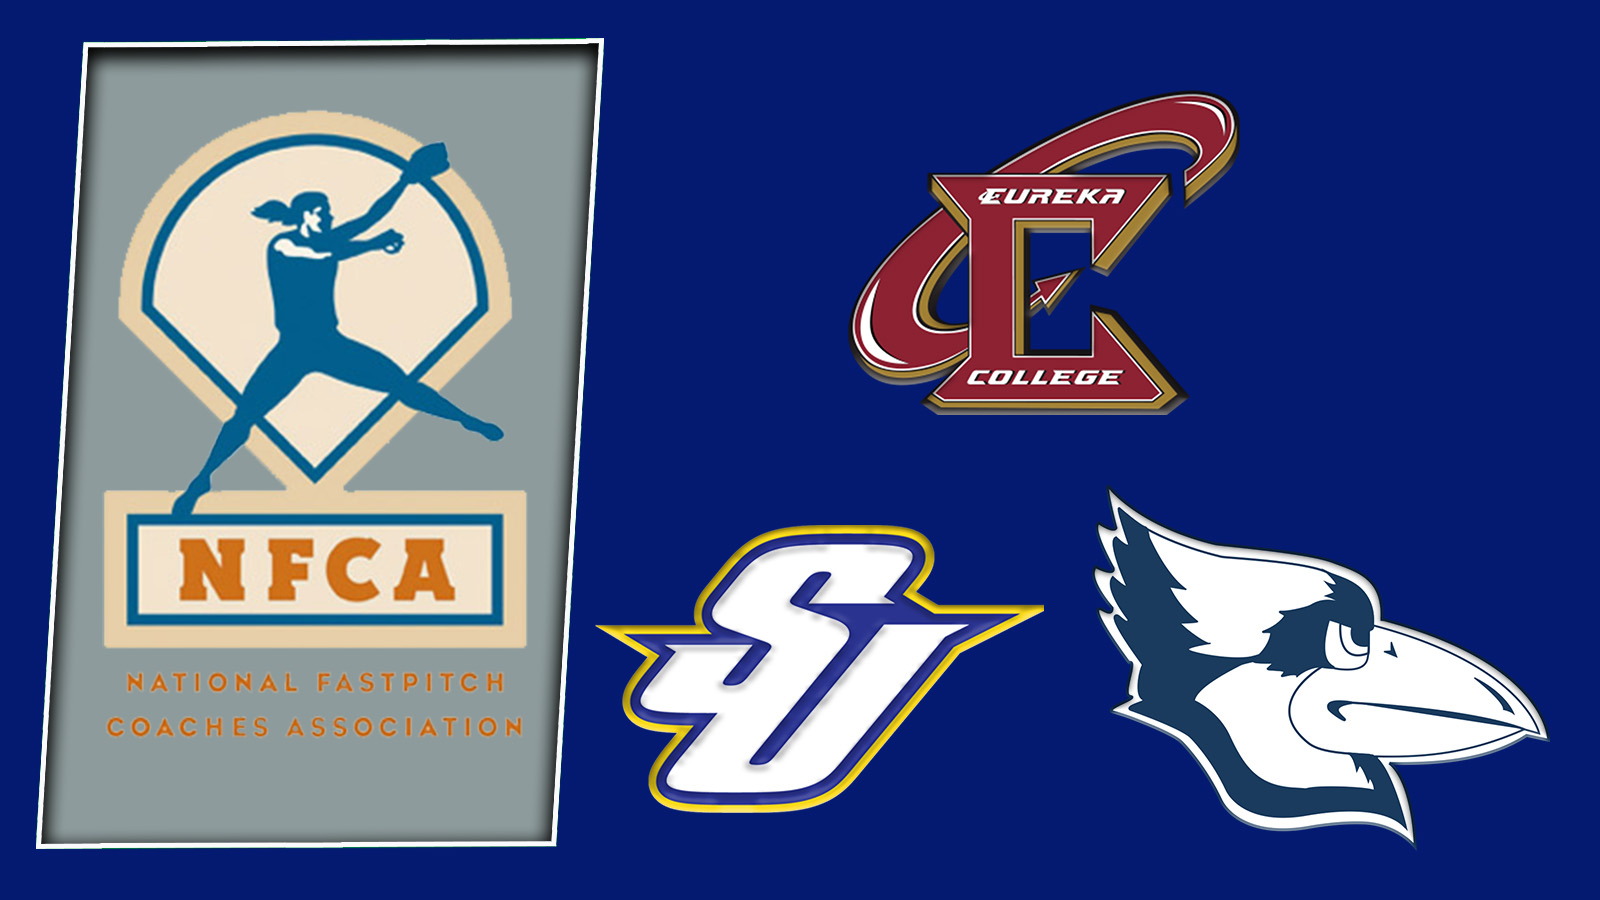 Programs and Players Recognized by NFCA